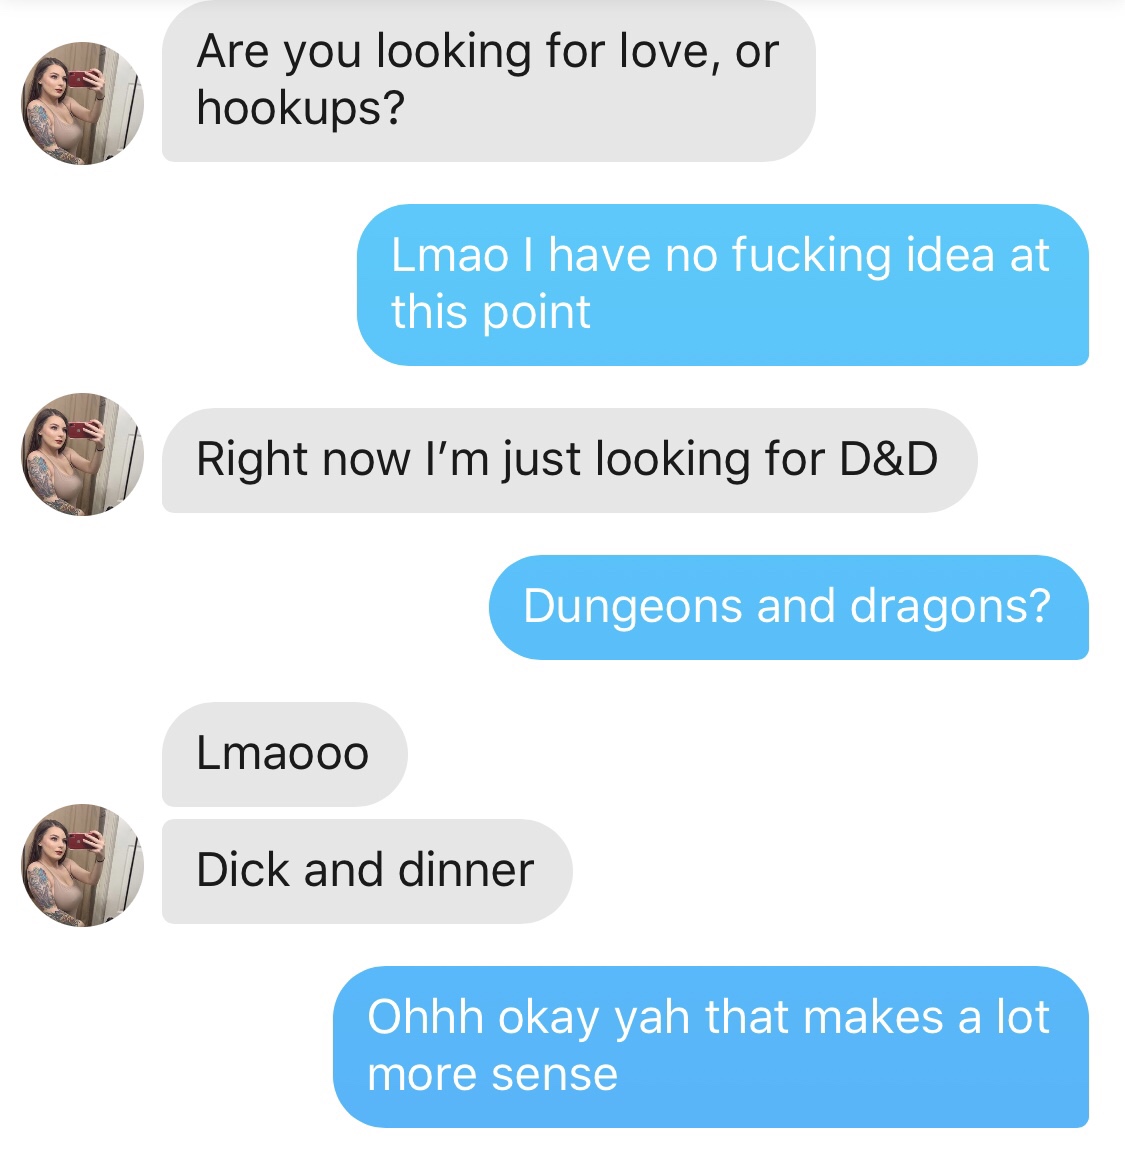 memes - d&d dick and dinner - Are you looking for love, or hookups? Lmao I have no fucking idea at this point Right now I'm just looking for D&D Dungeons and dragons? Lmaooo Dick and dinner Dick and dinner Ohhh okay yah that makes a lot more sense